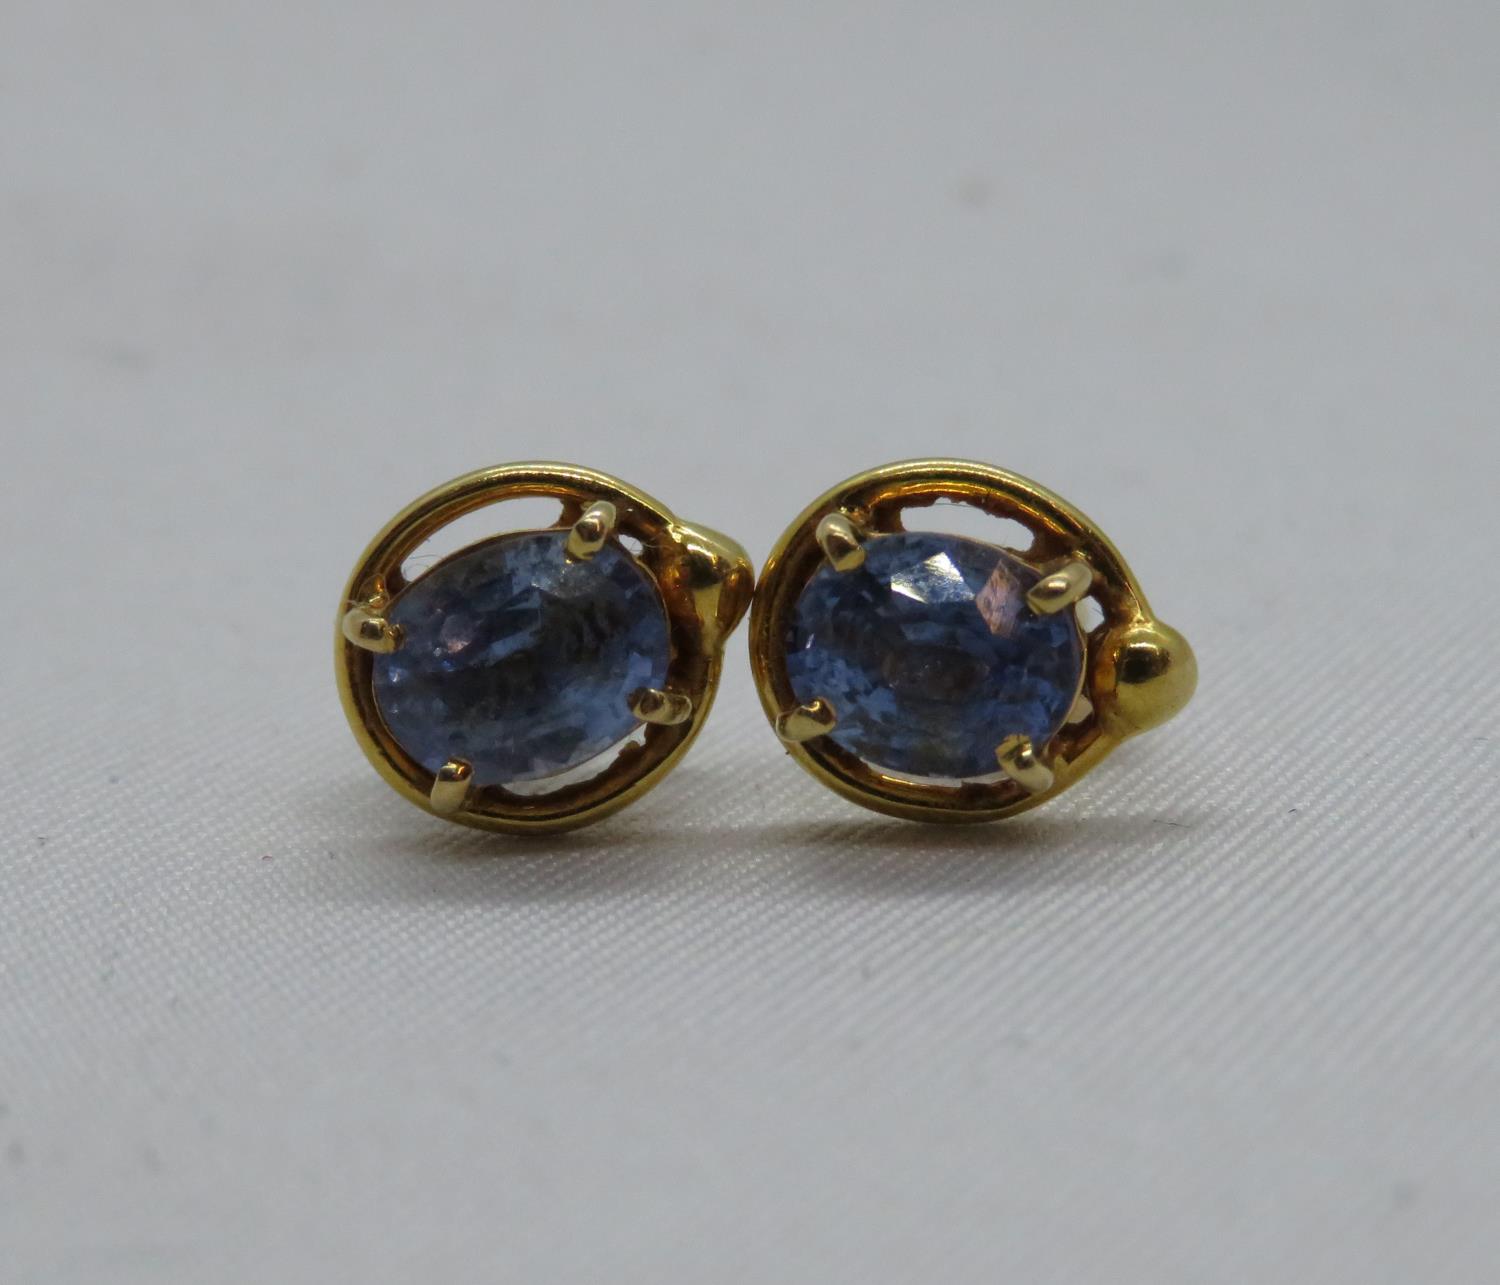 2x high grade yellow gold earrings with brilliant cut .5carat (per ear) sapphires